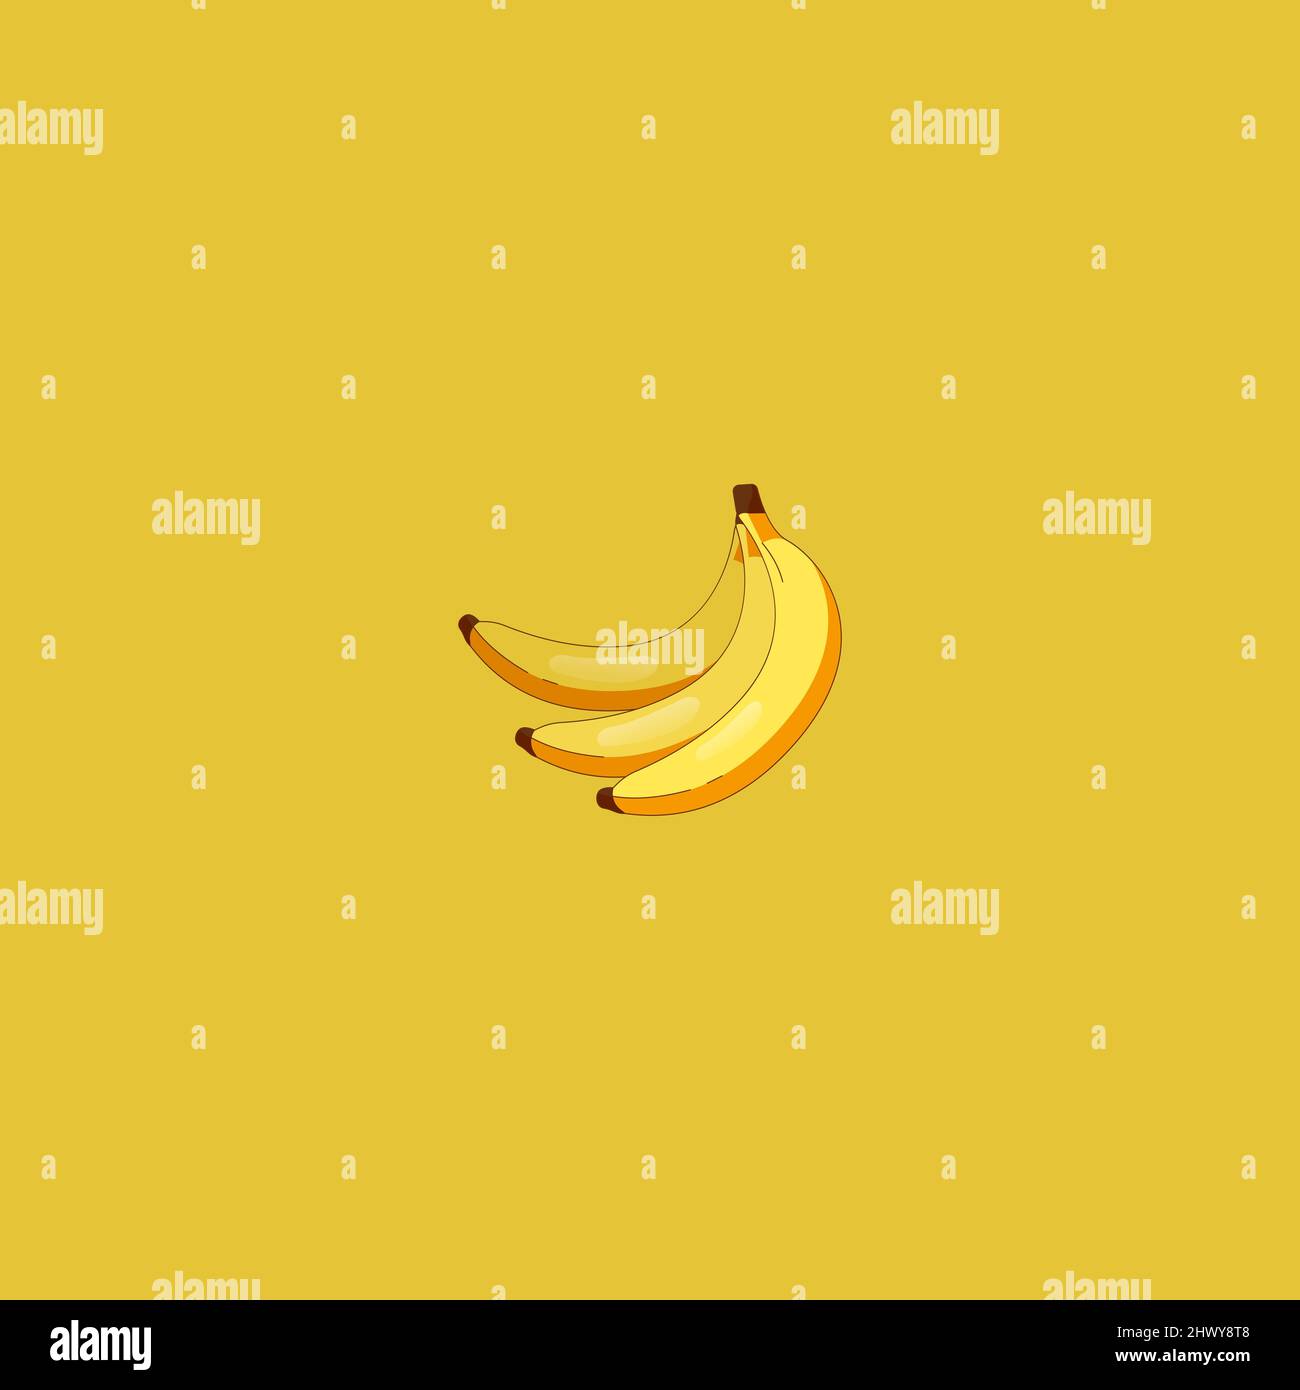 Banana illustration design suitable for shirts, wall art, accessories, hats, stickers, phone cases and frames. Stock Vector